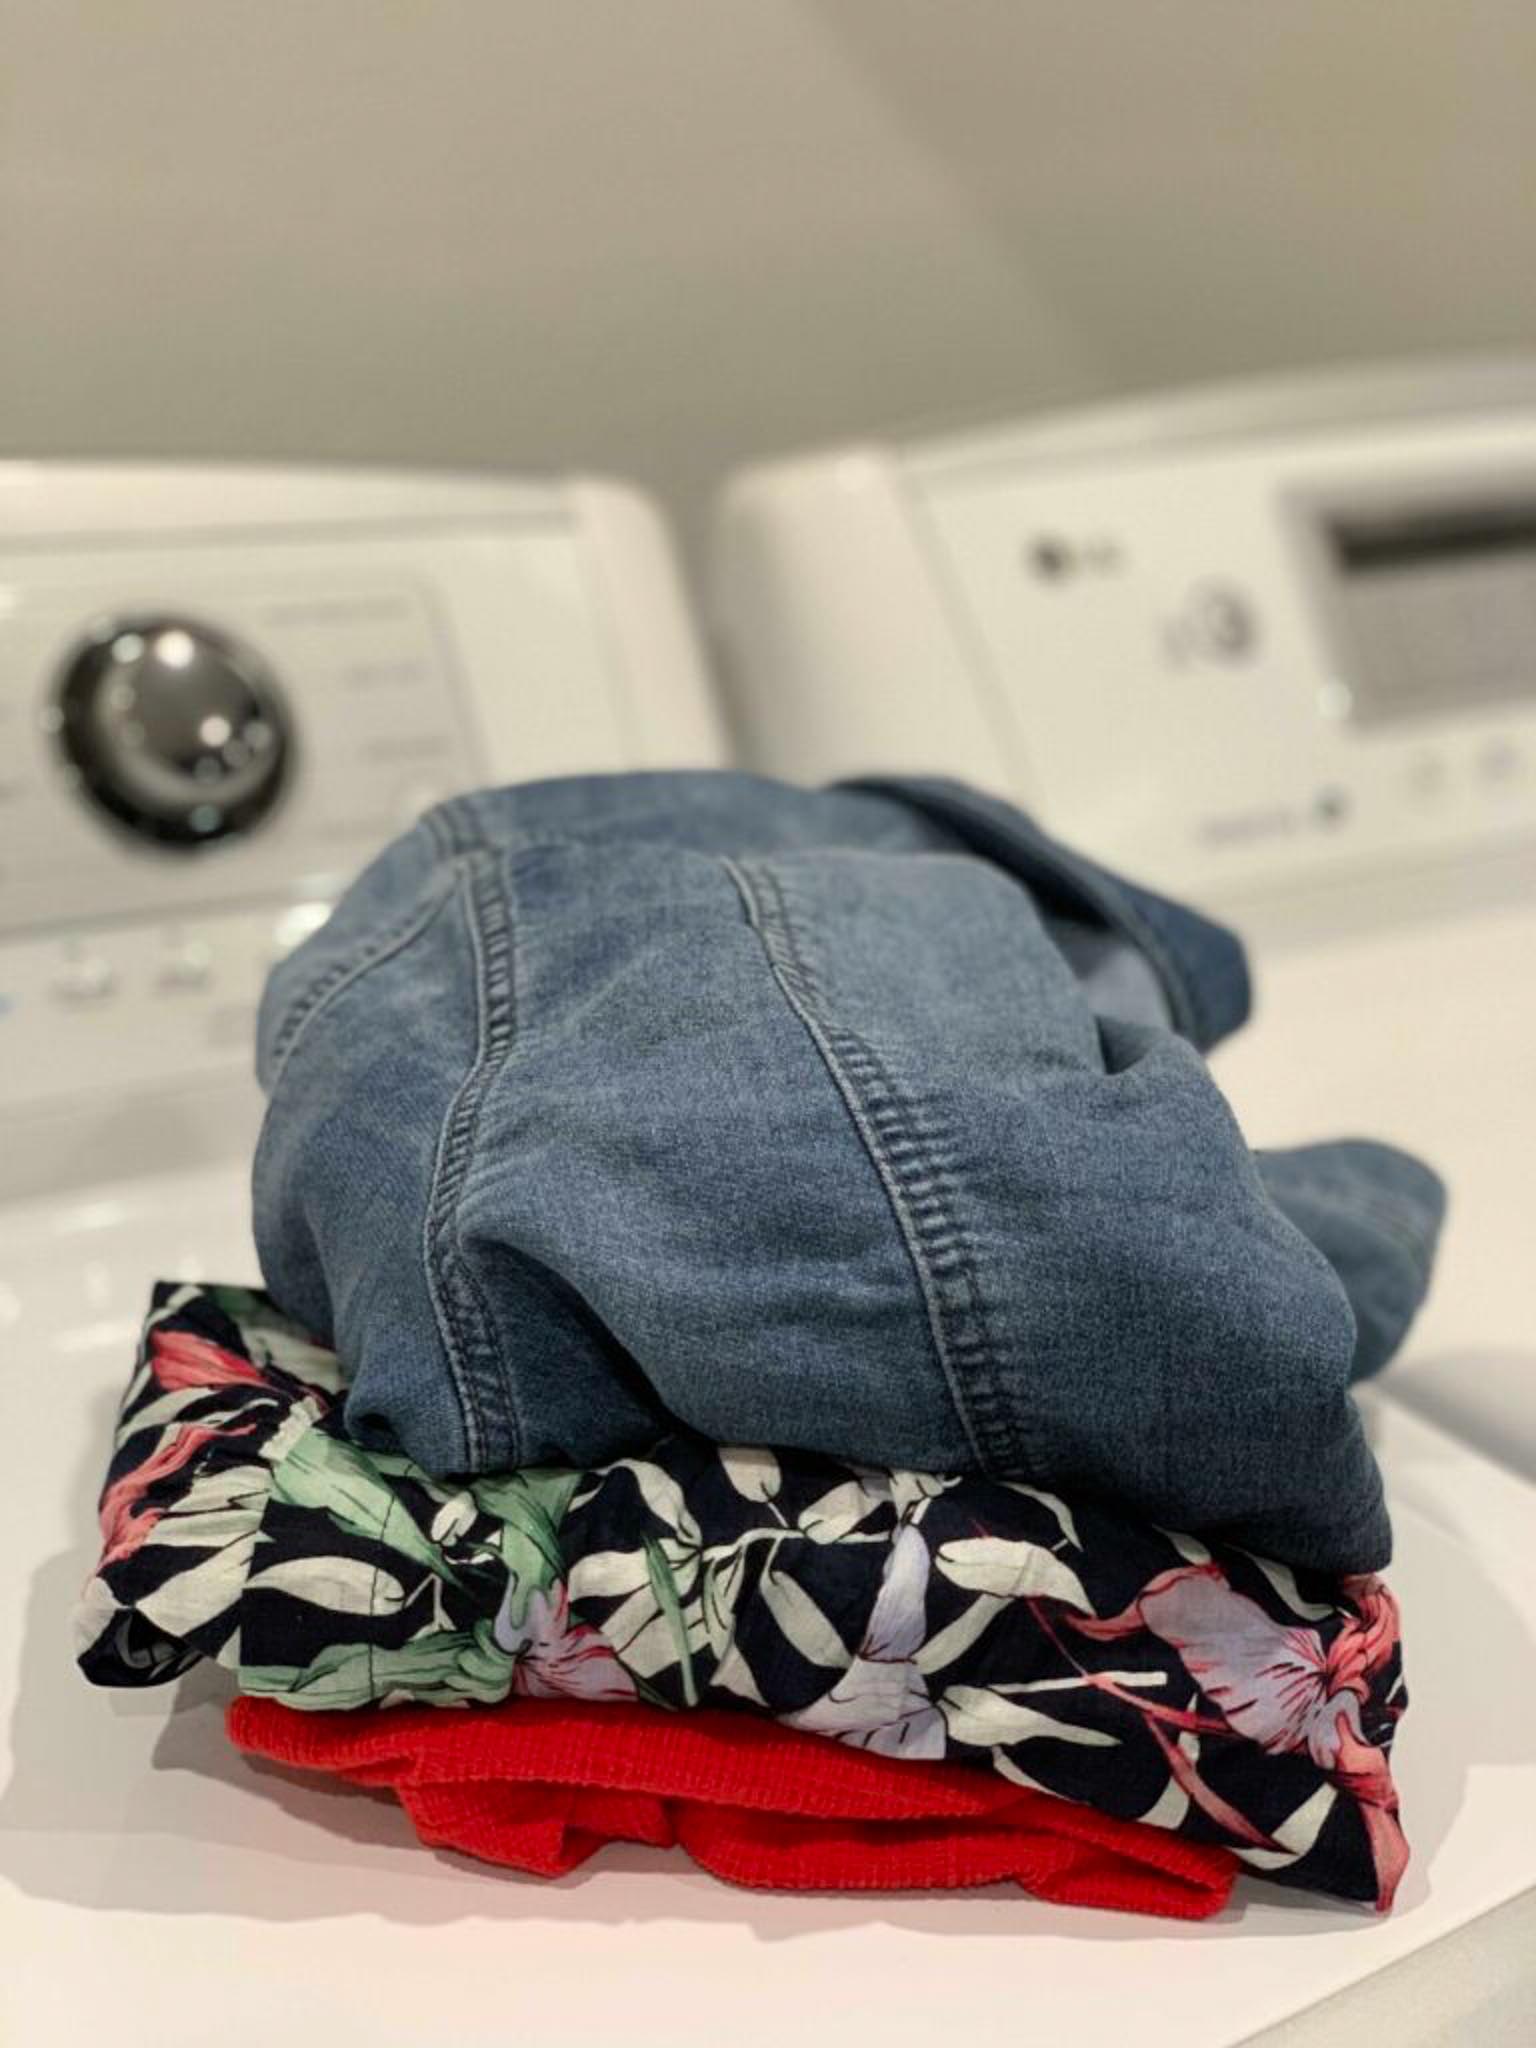 Clean clothes sitting on washing machine